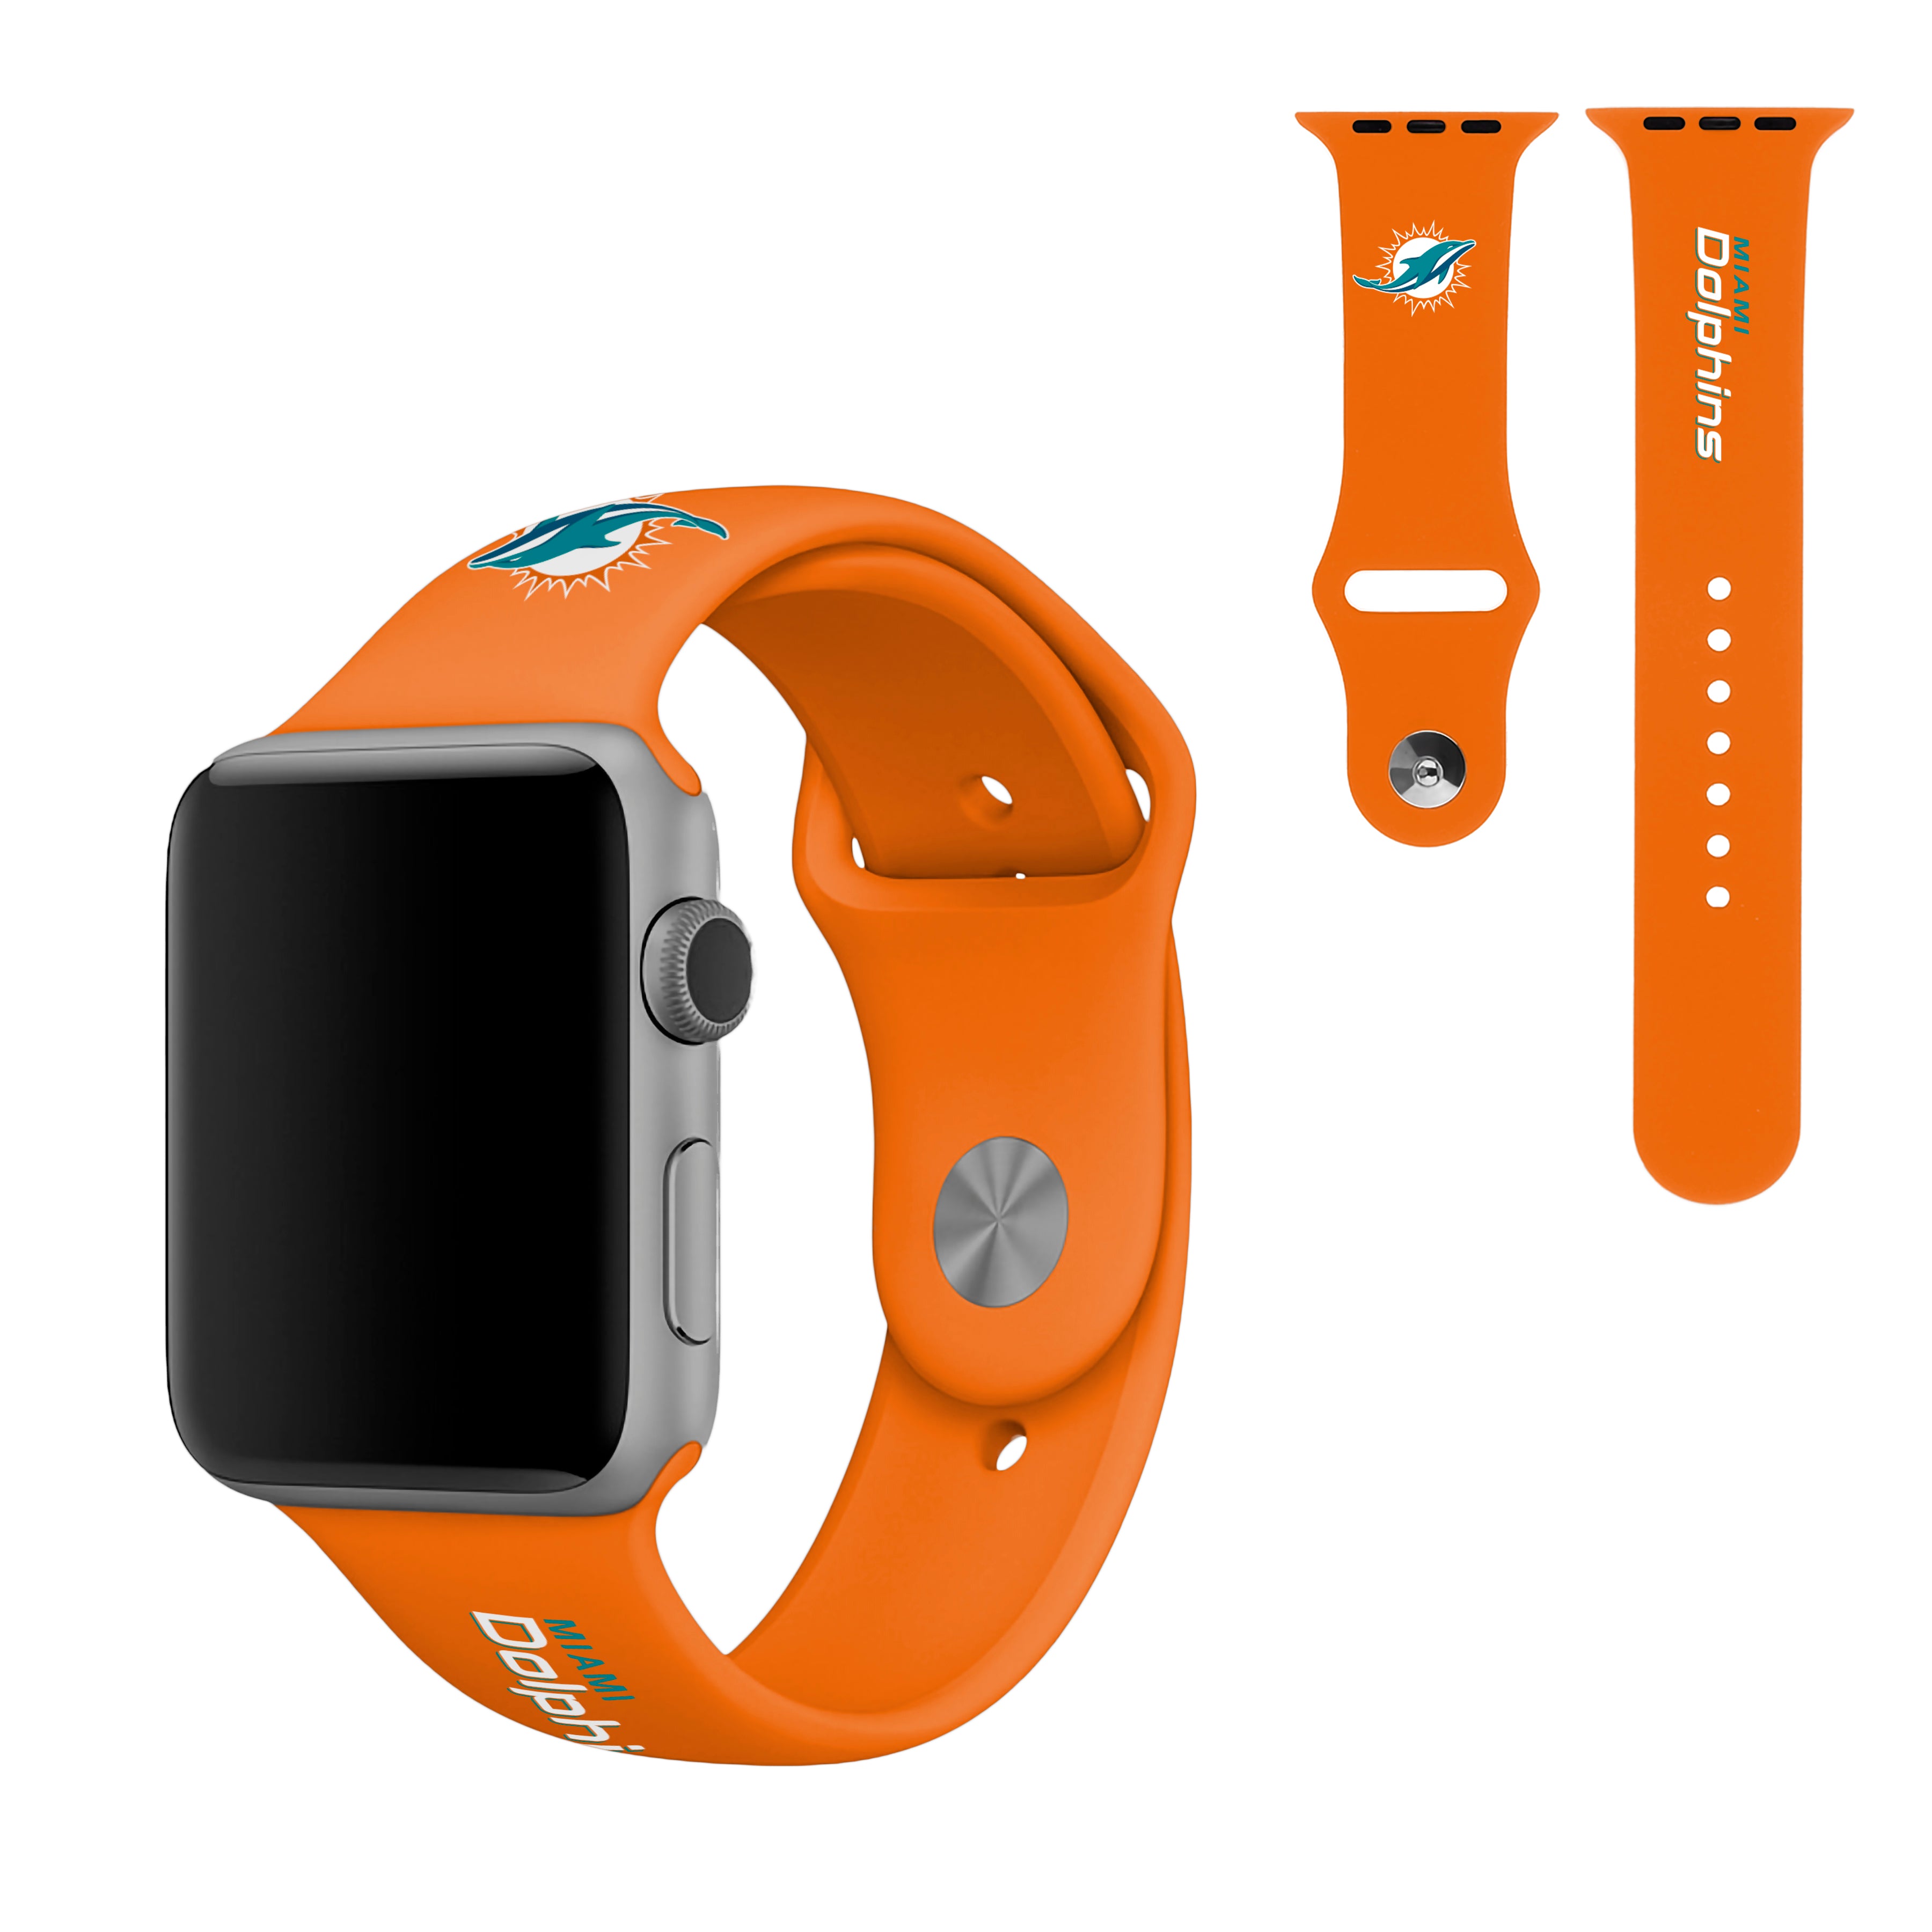 NFL Apple Watch Band - 42mm